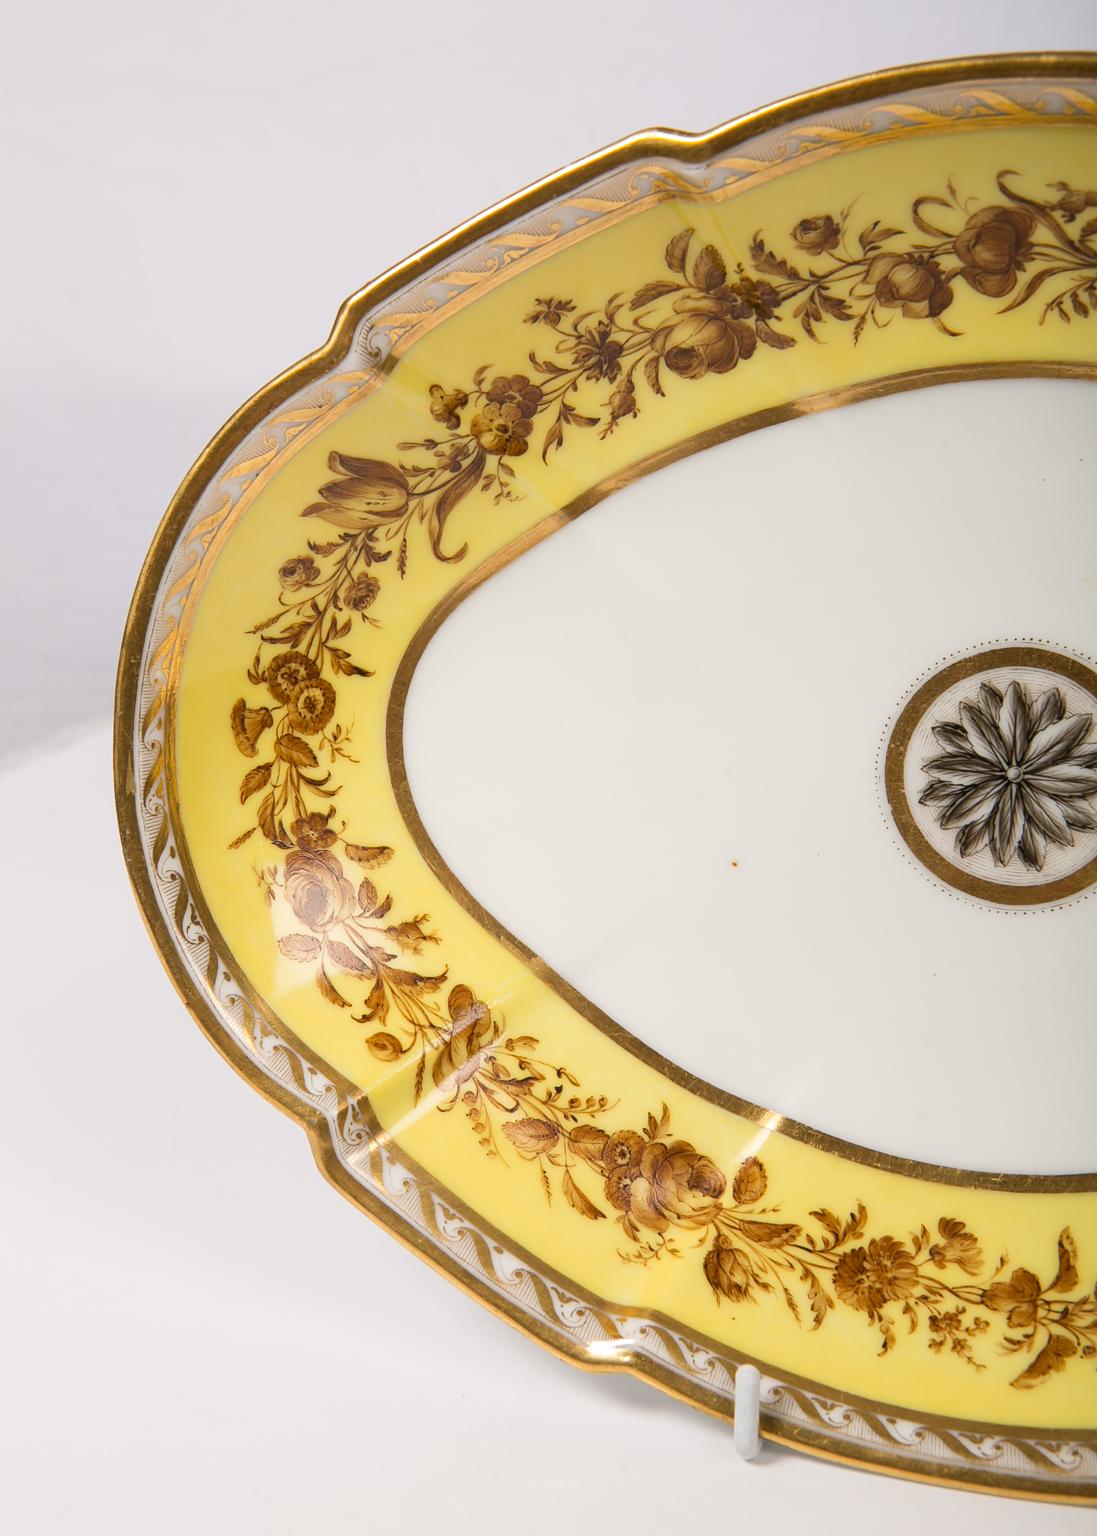 Porcelain Pair of Neoclassical French Dishes, Made by Dihl et Guehard Late 18th Century